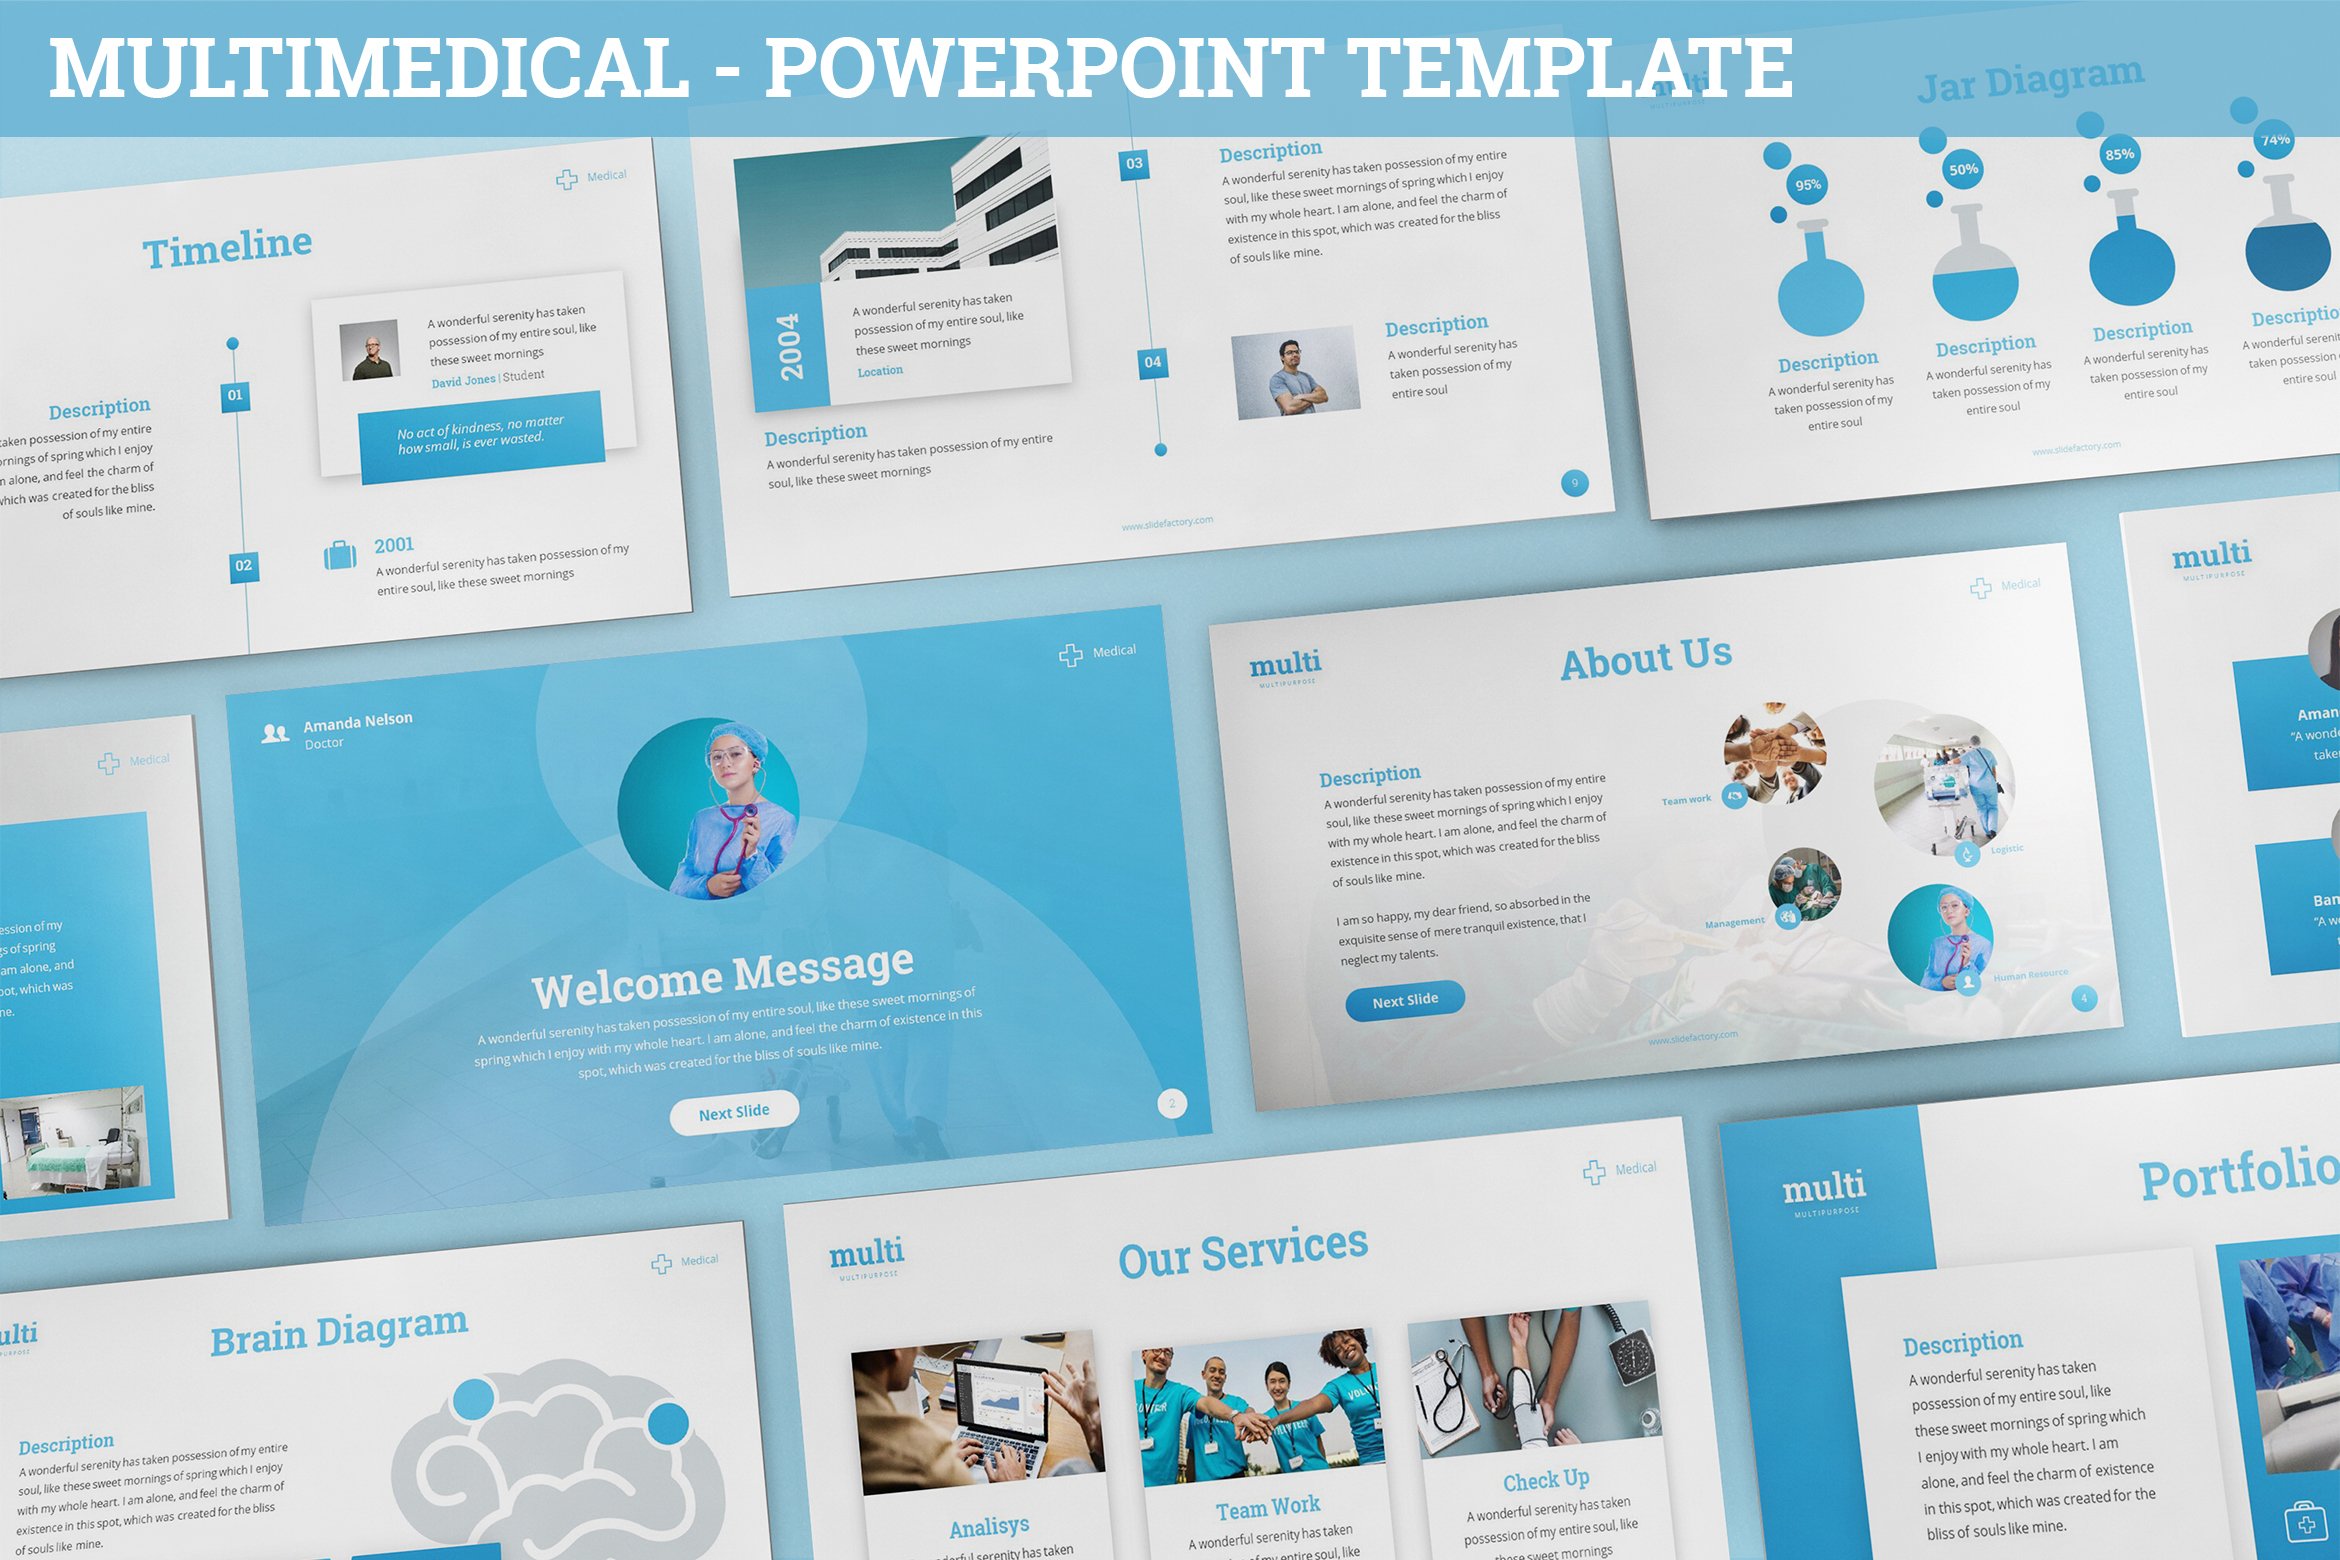 This is a light blue template for medical themes.